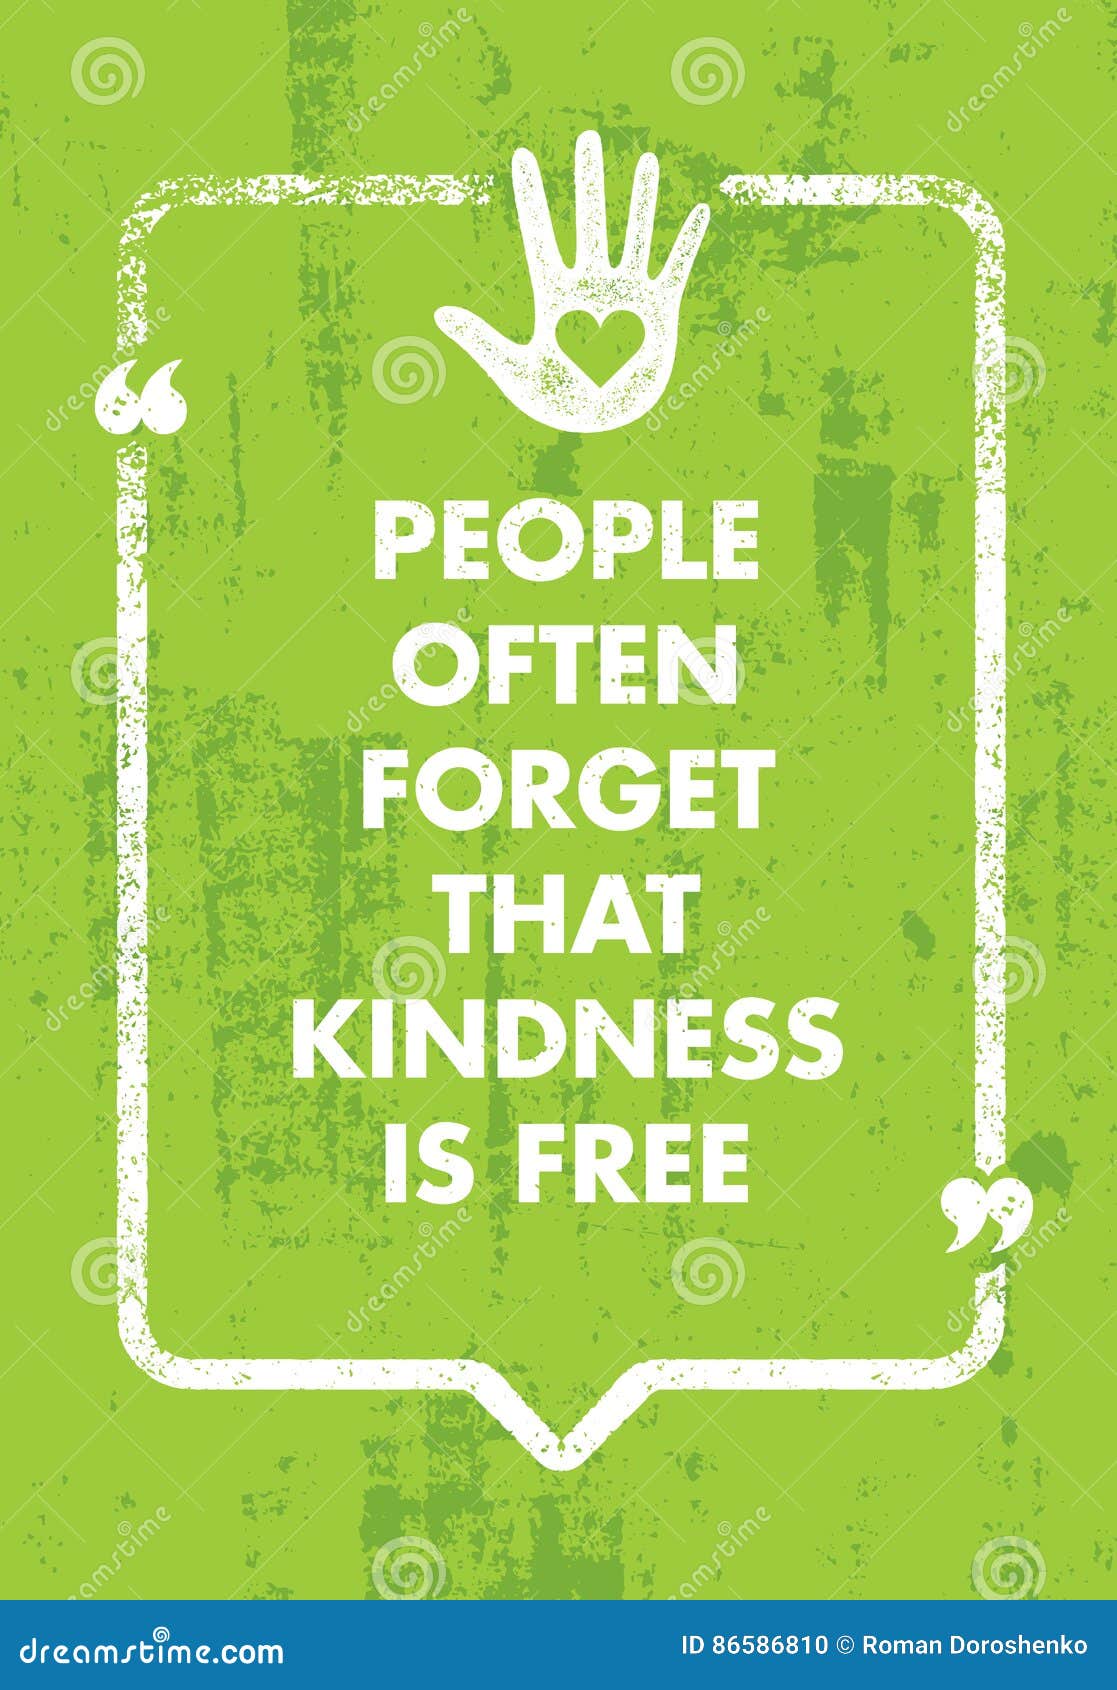 people often forget that kindness is free. charity inspiration creative motivation quote.  typography banner